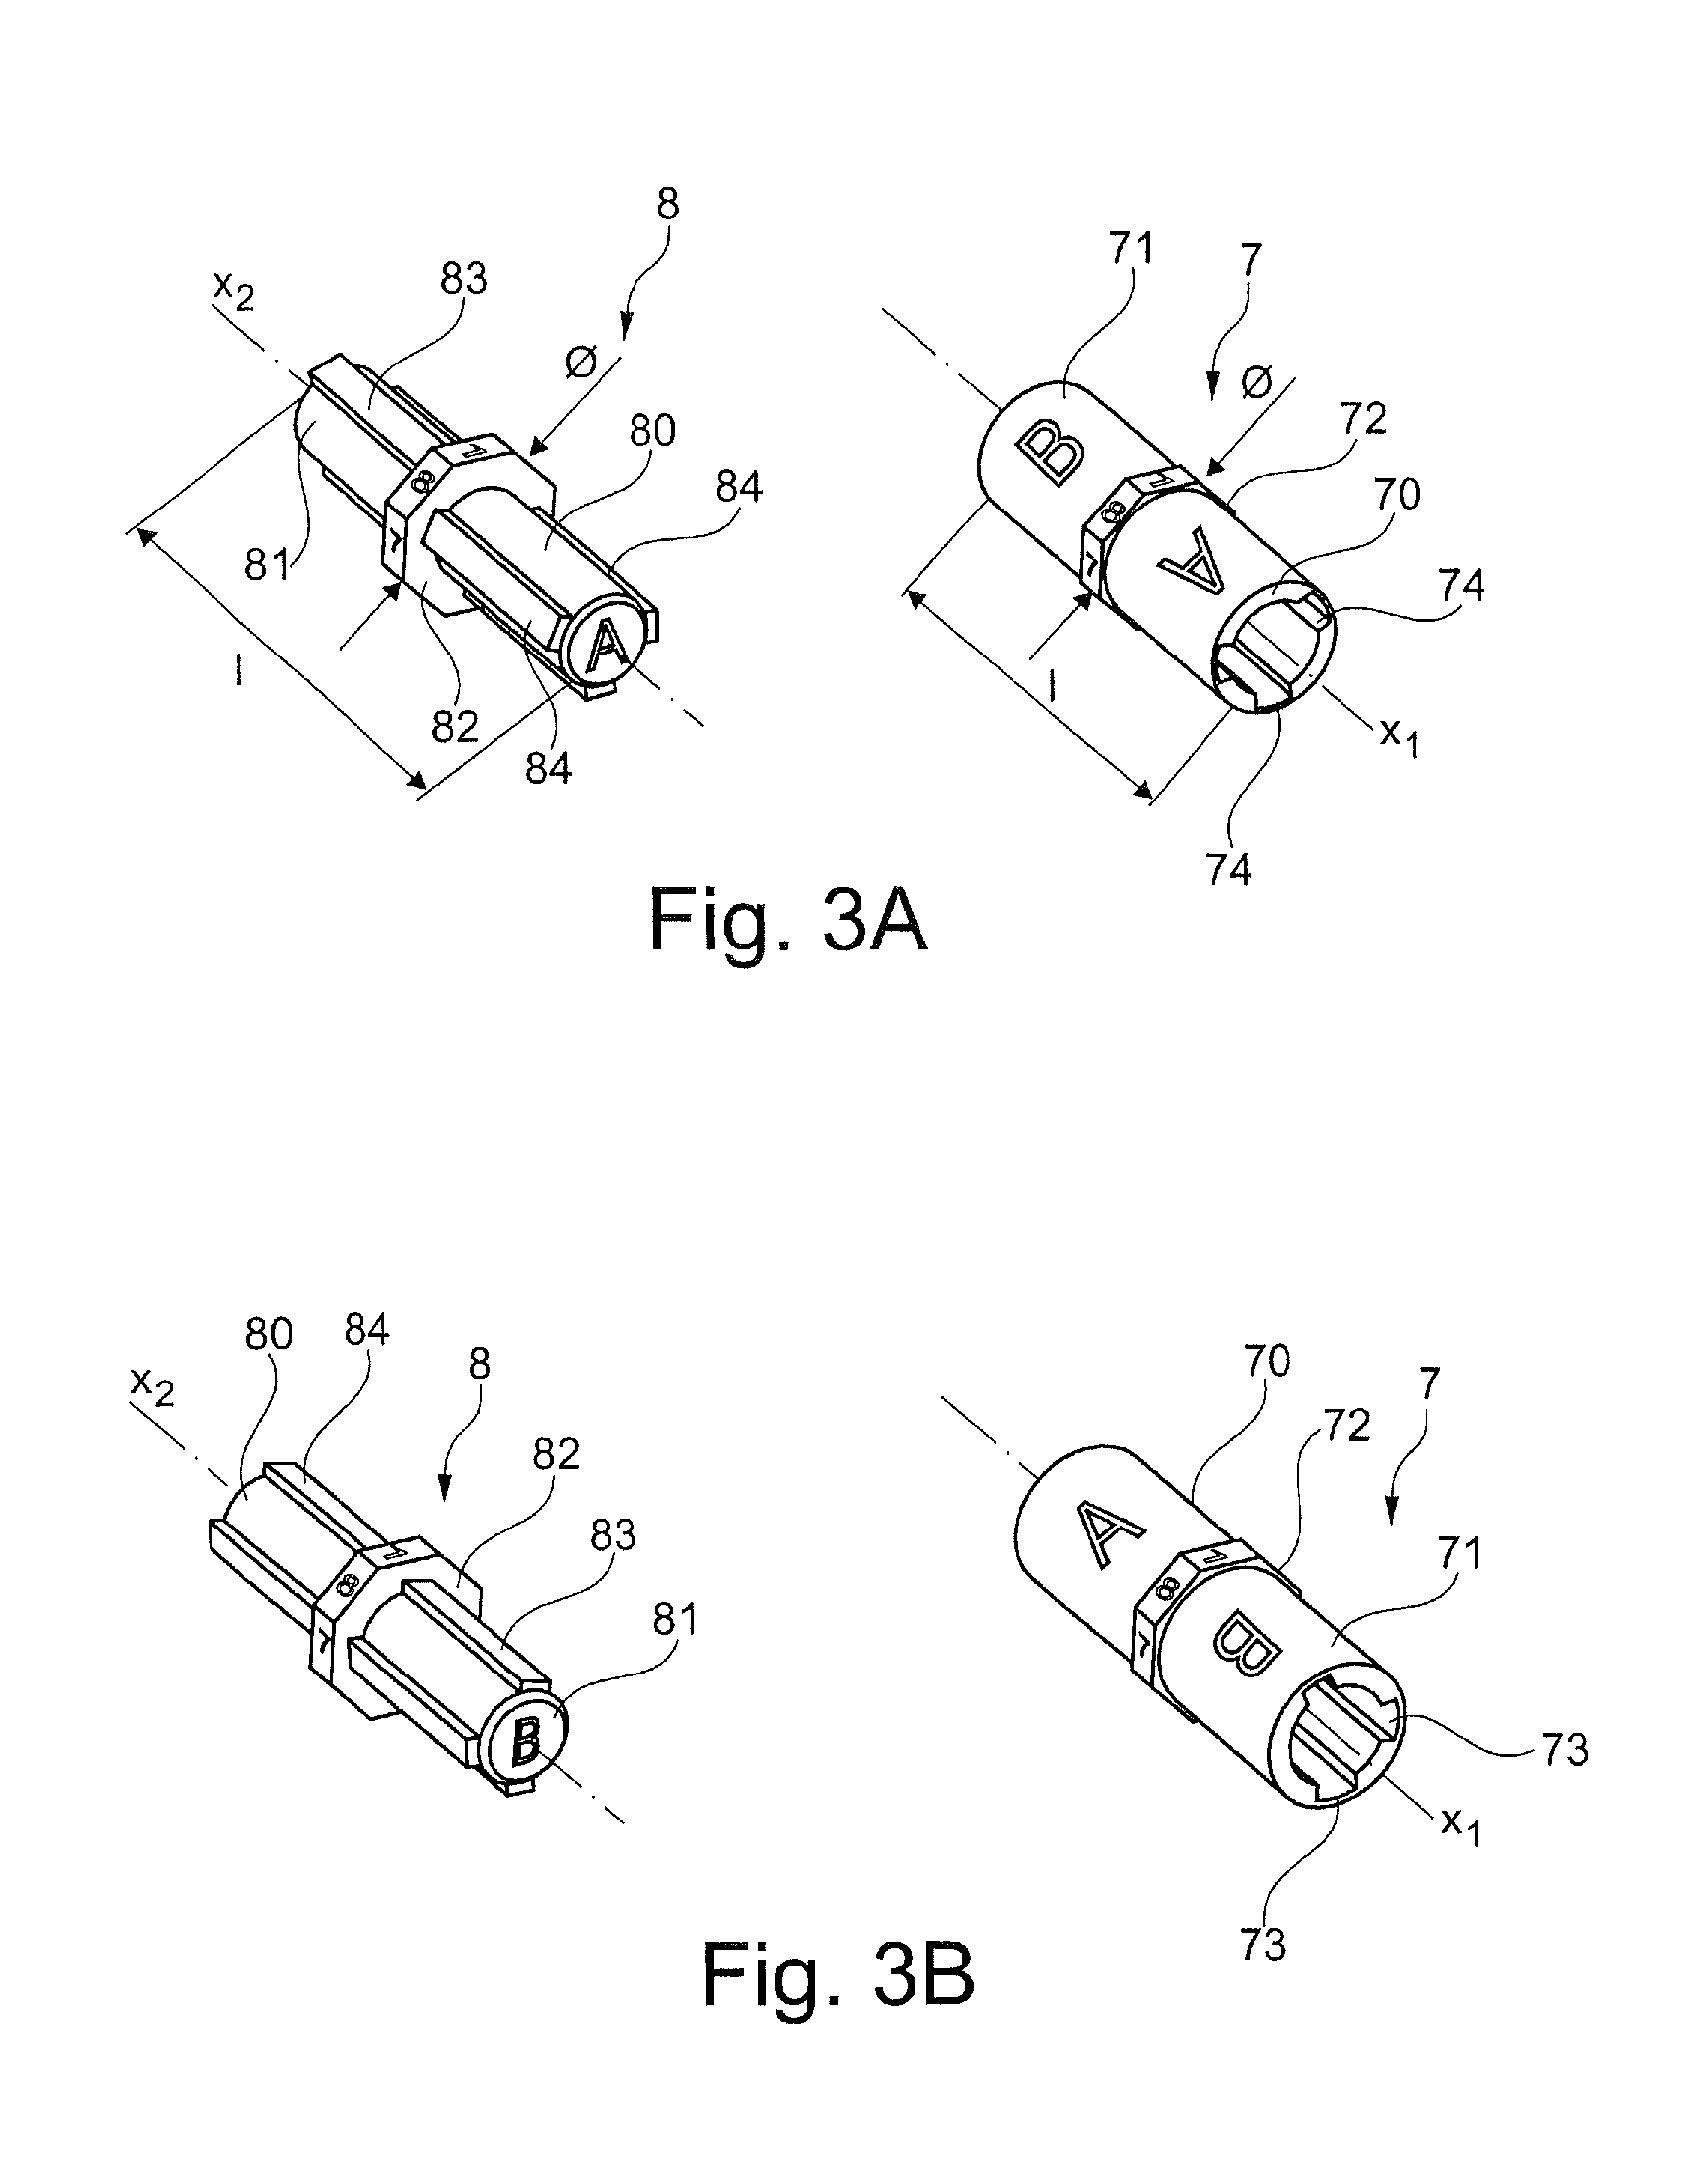 Connection assembly having multi-contact connectors with a polarizing system using keys